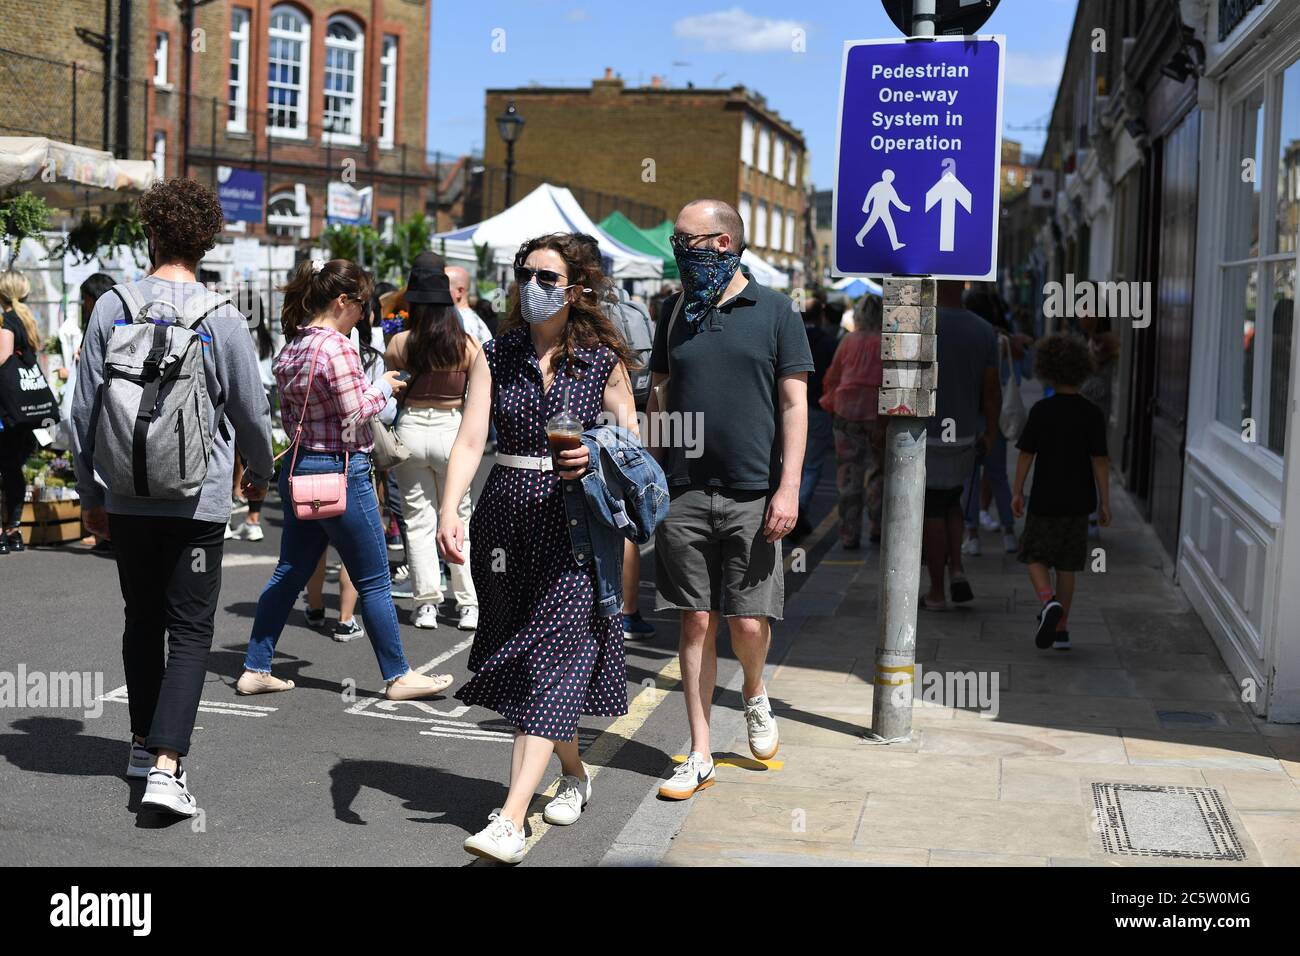 A one way system sign at Columbia Road Flower Market, London, as it reopens following the easing of coronavirus lockdown restrictions across England. Stock Photo